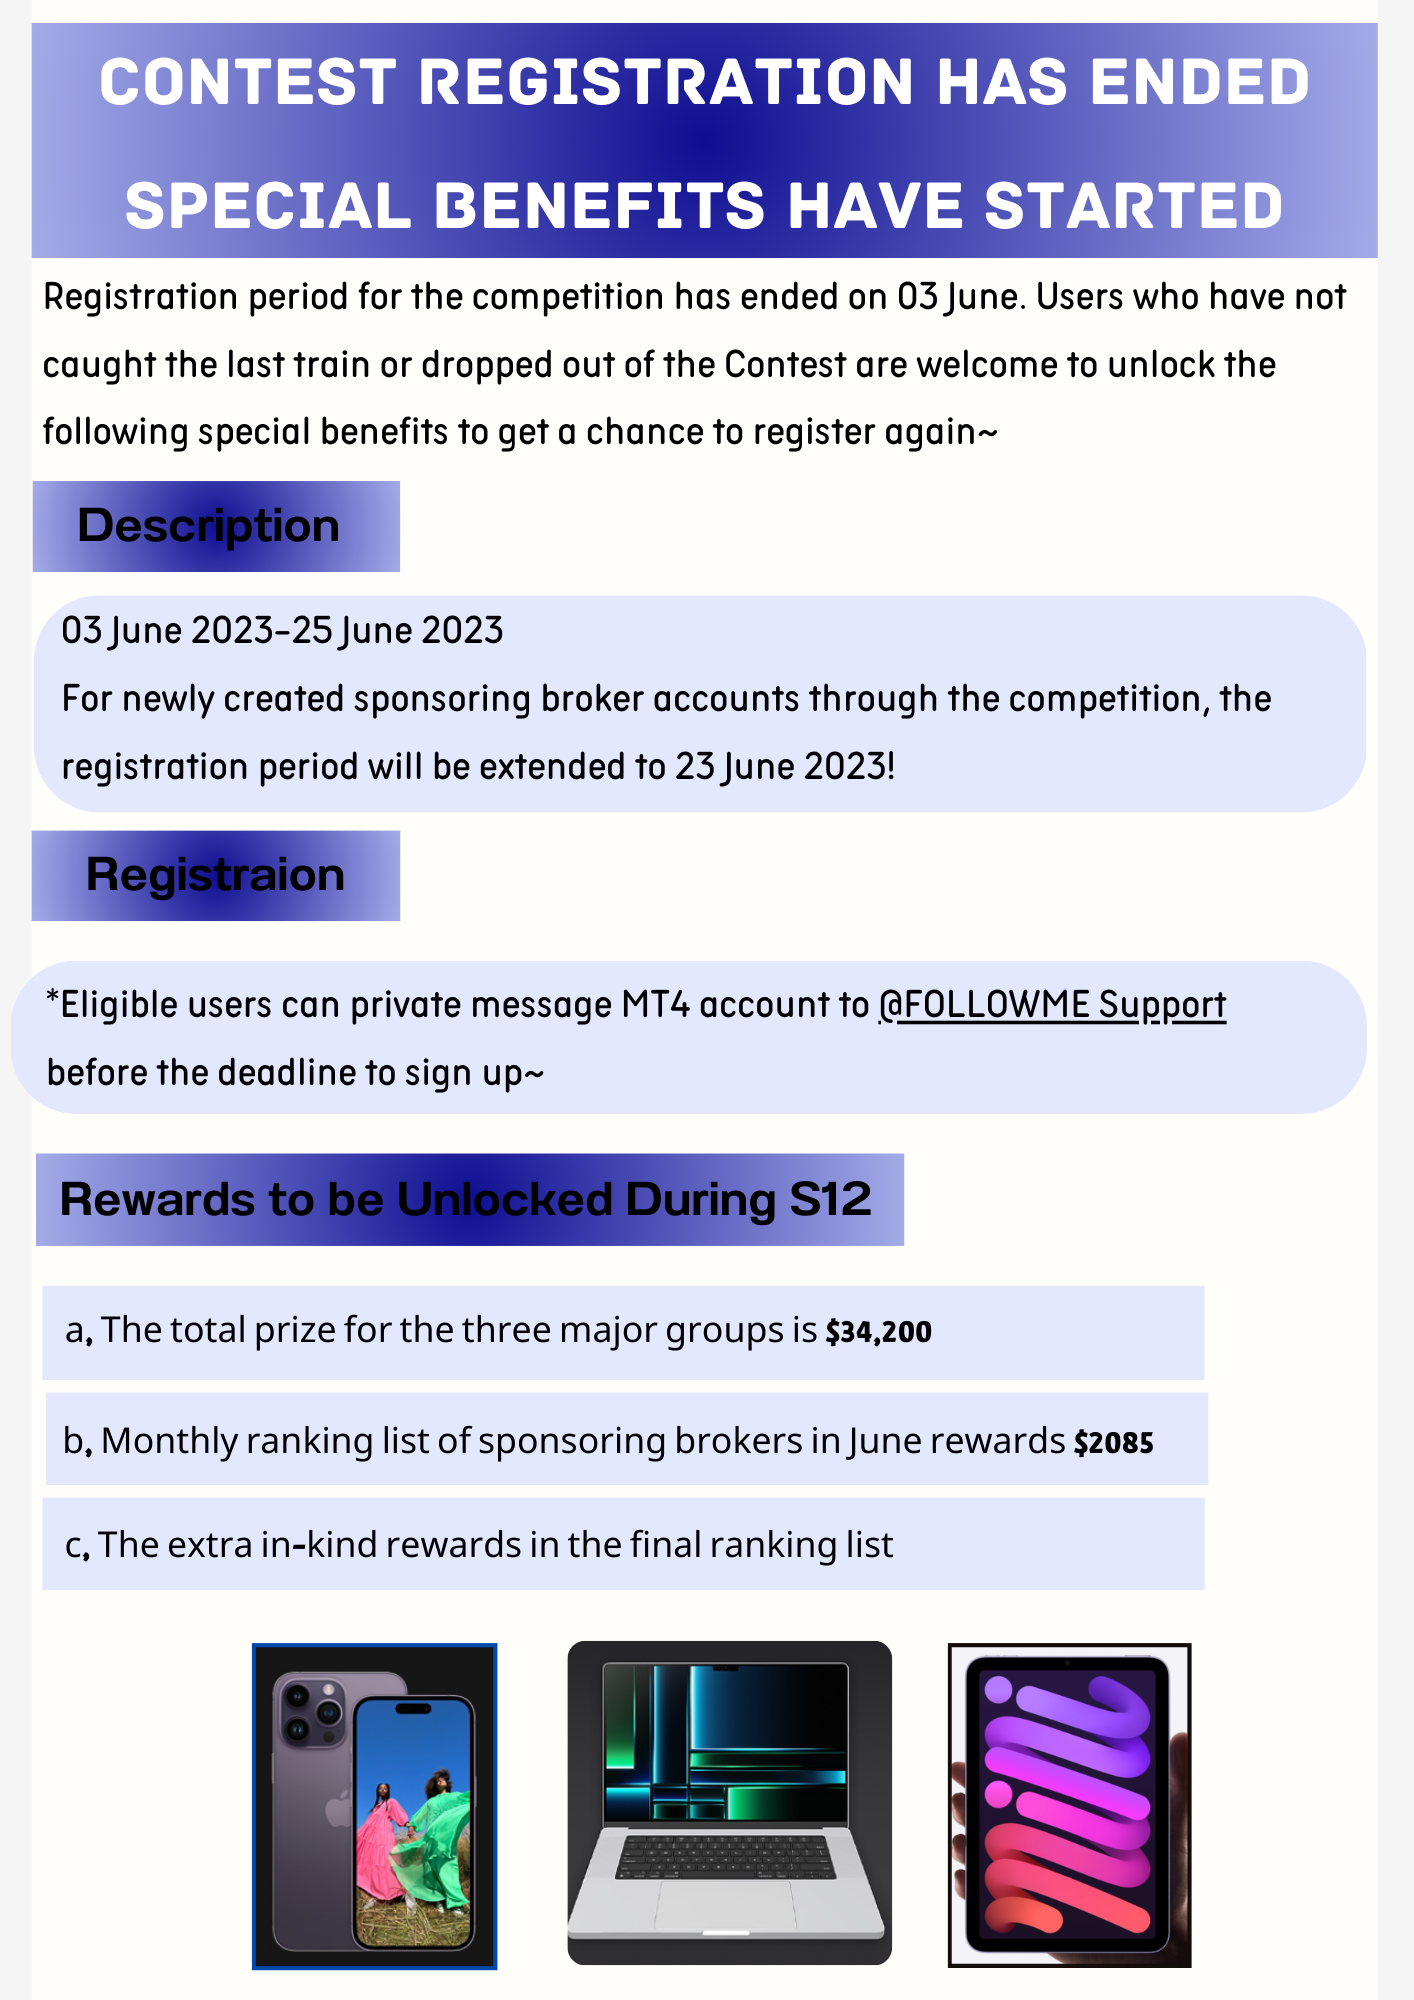 S12 Newsletter | There are last 1 month left for the Contest